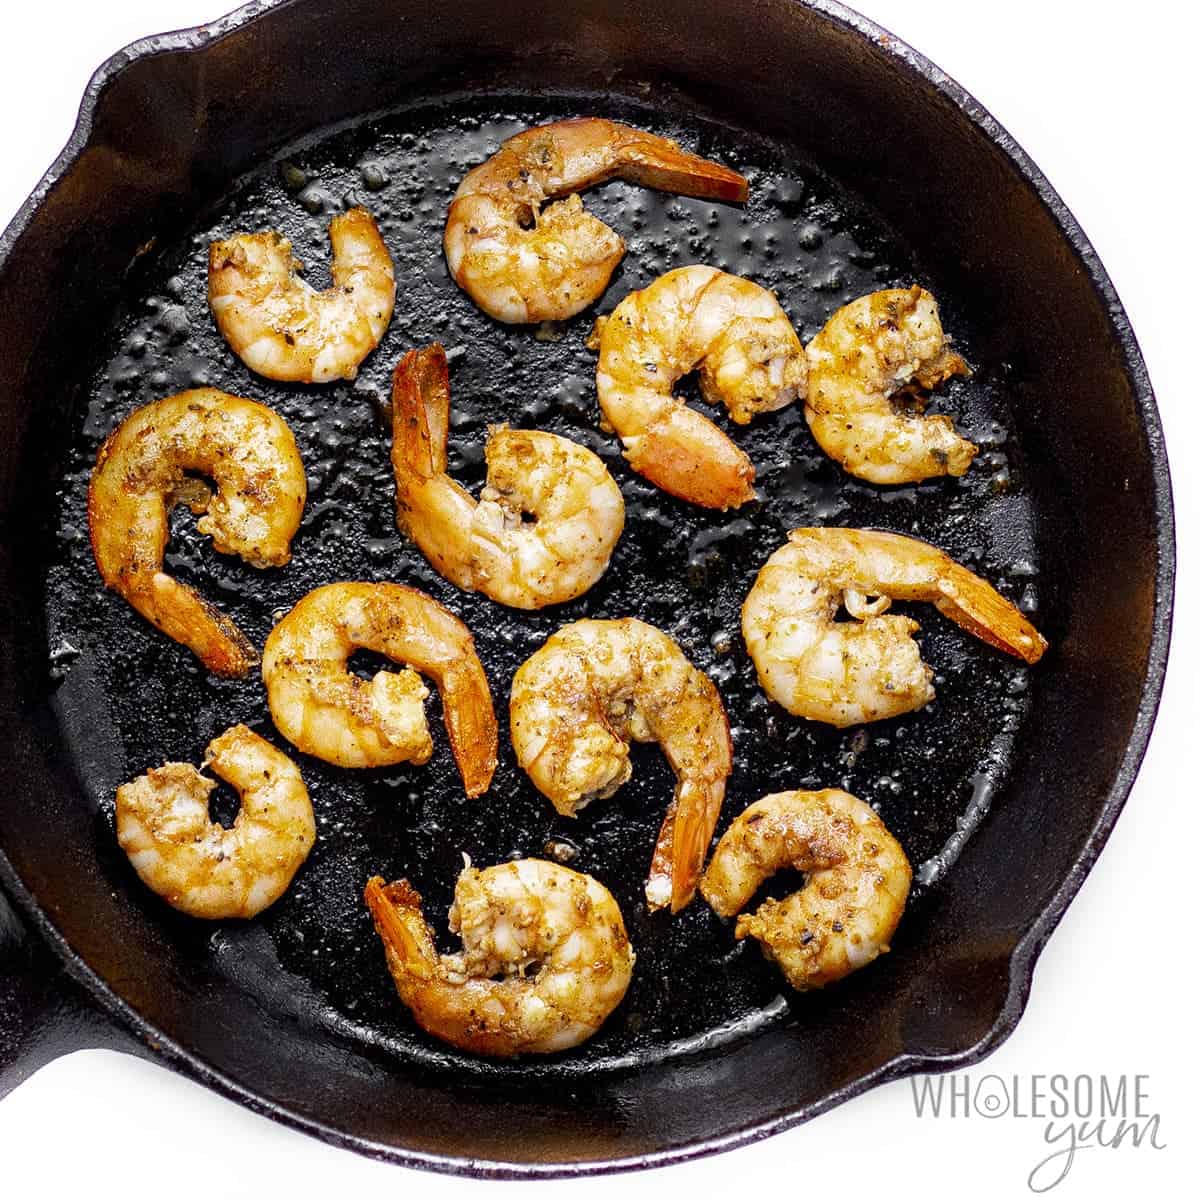 Shrimp cooked in cast iron pan.